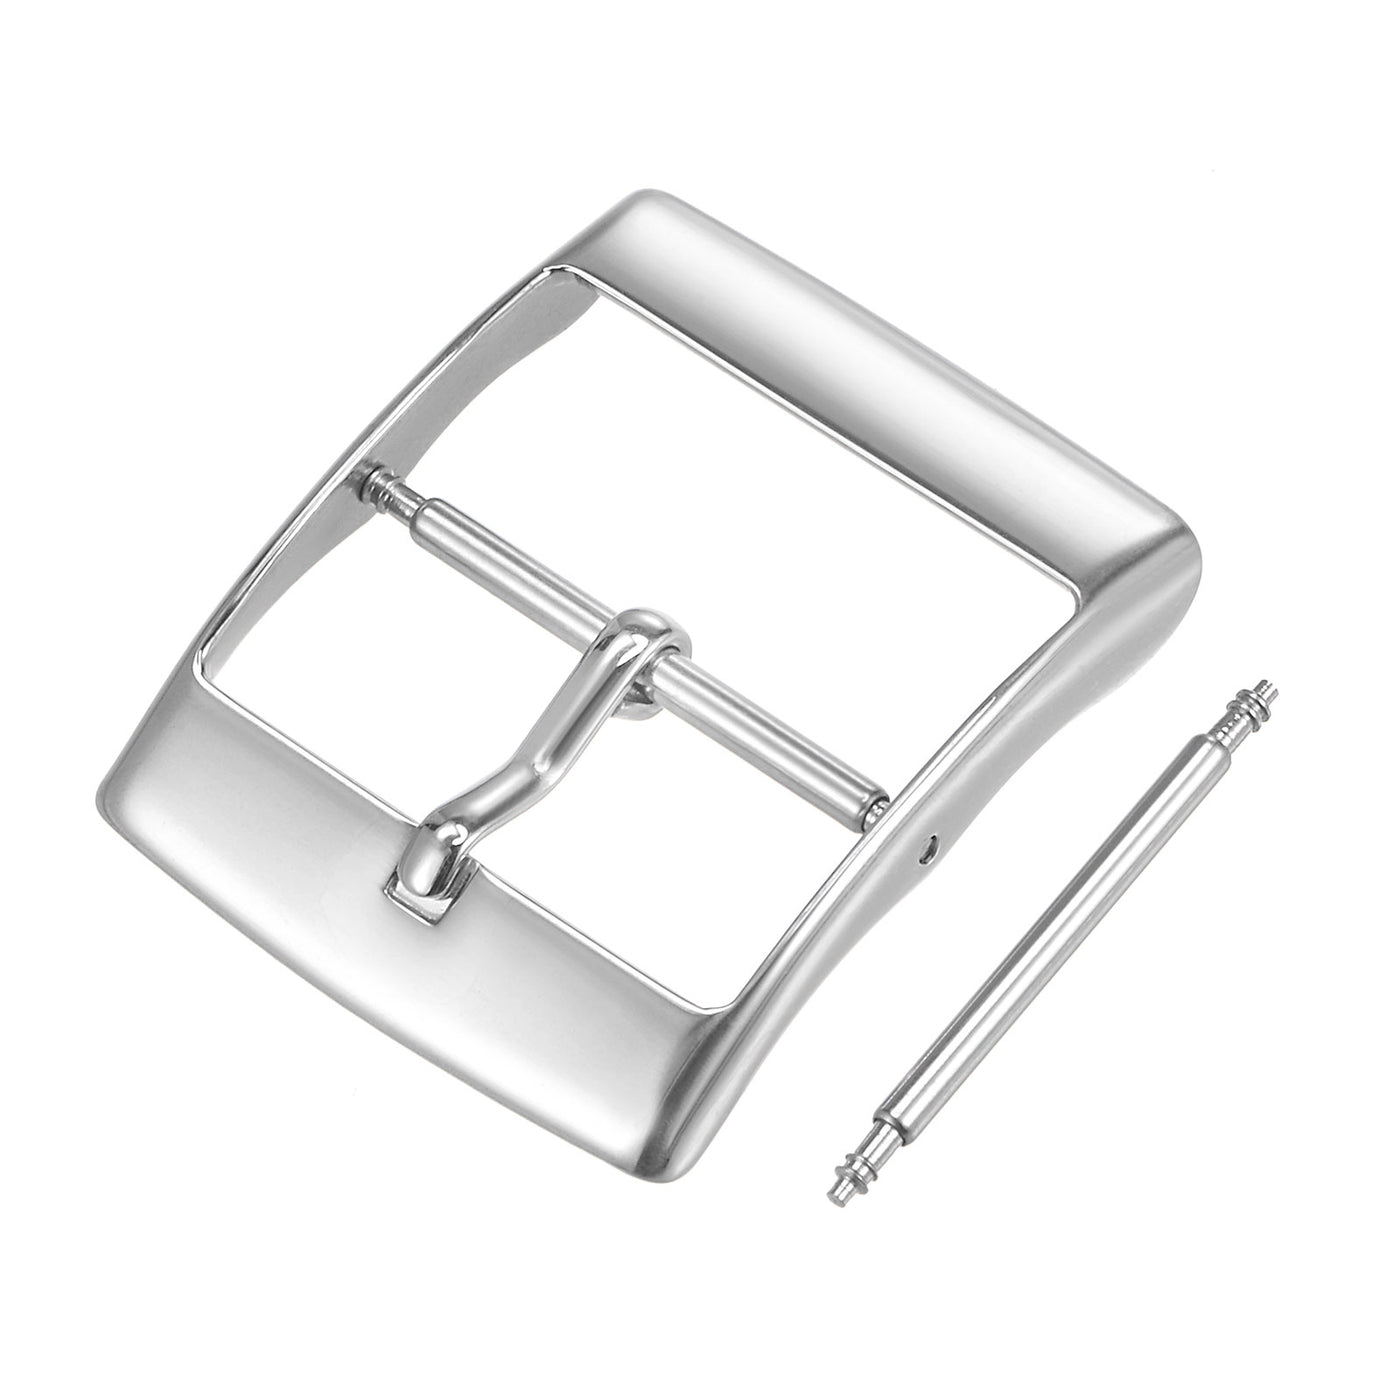 Uxcell Uxcell Watch SUS304 Silver Tone PVD Buckle for 18mm Width Watch Bands with Spring Bar